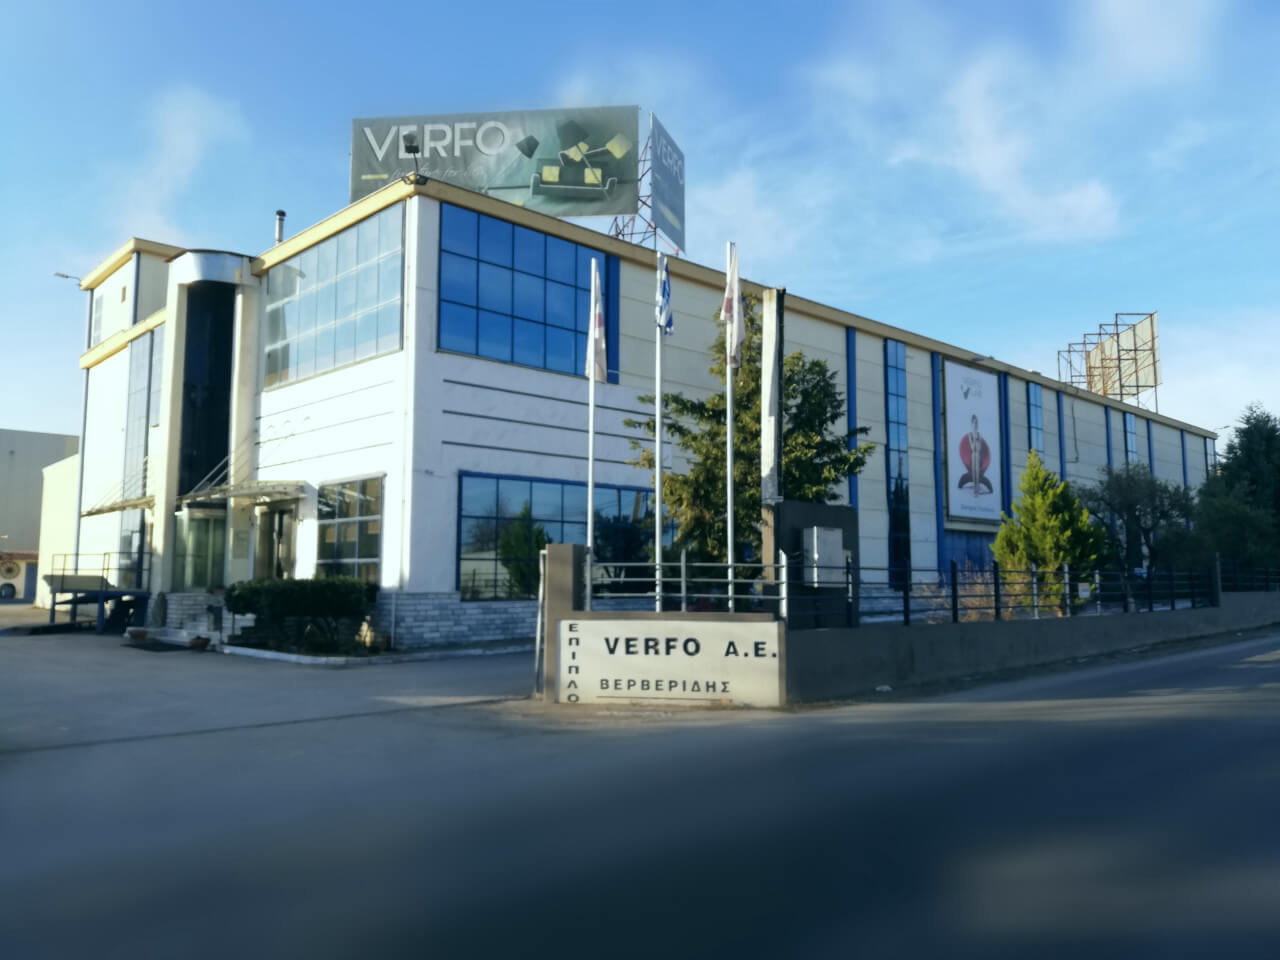 verfo furniture building outside